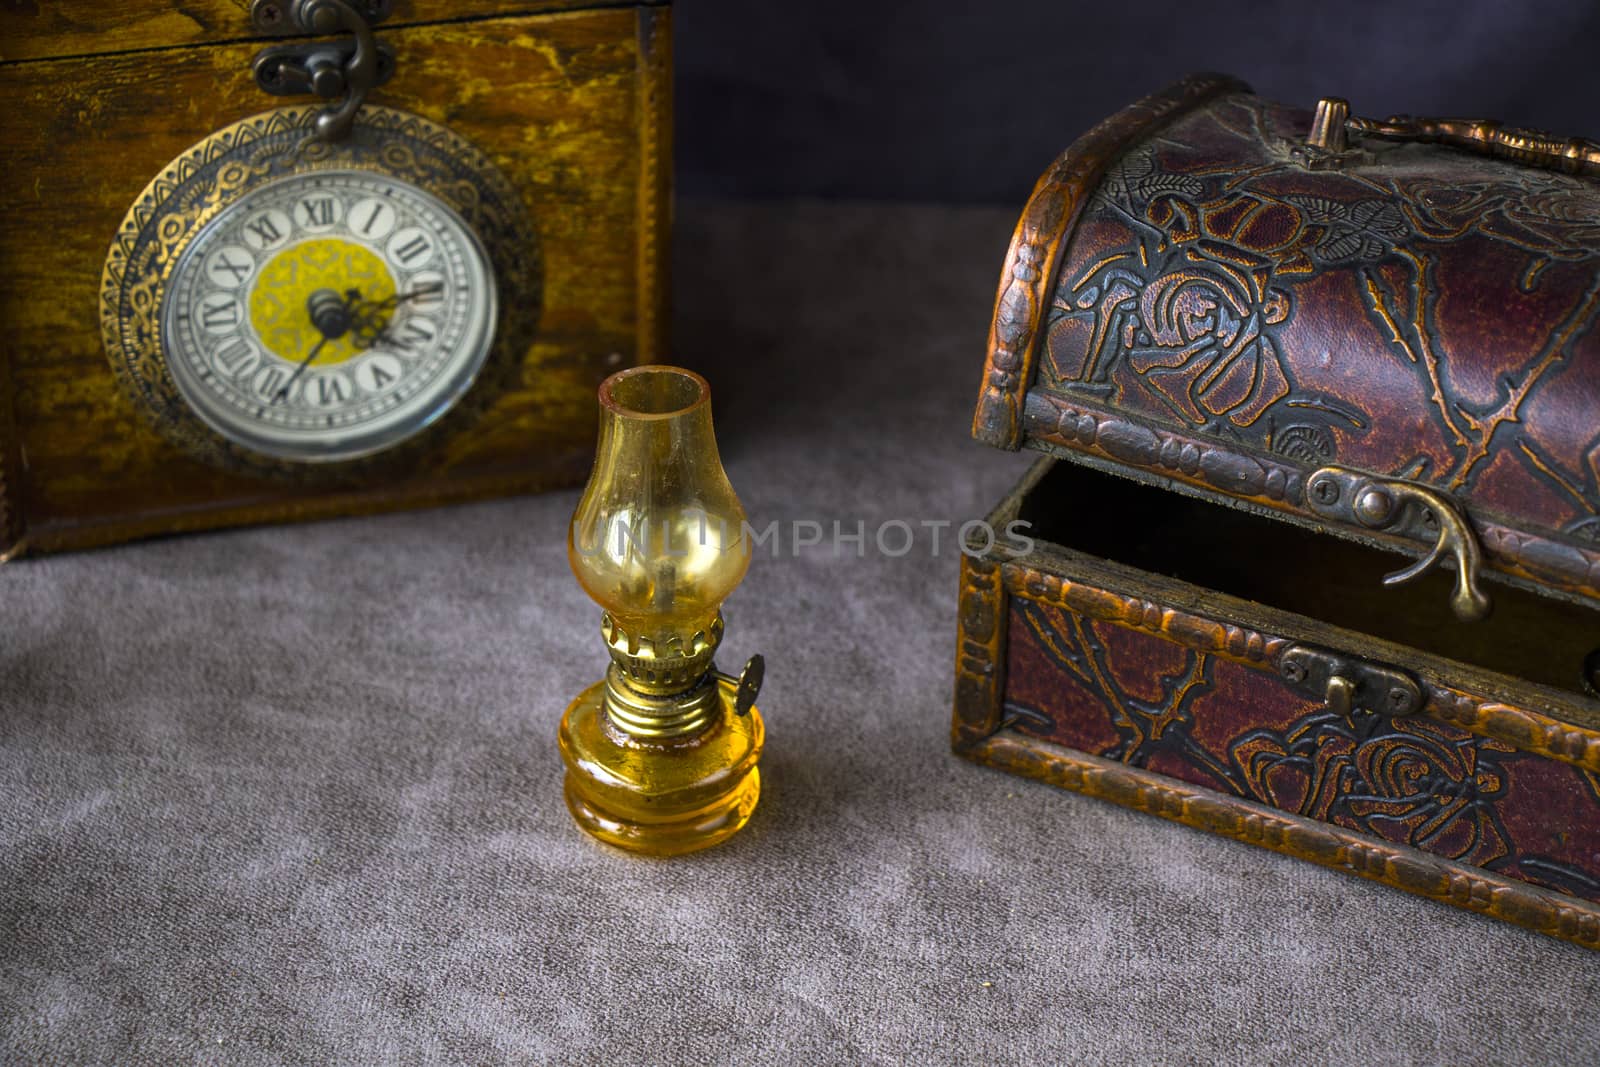 Vintage objects on the table, old box and lamp